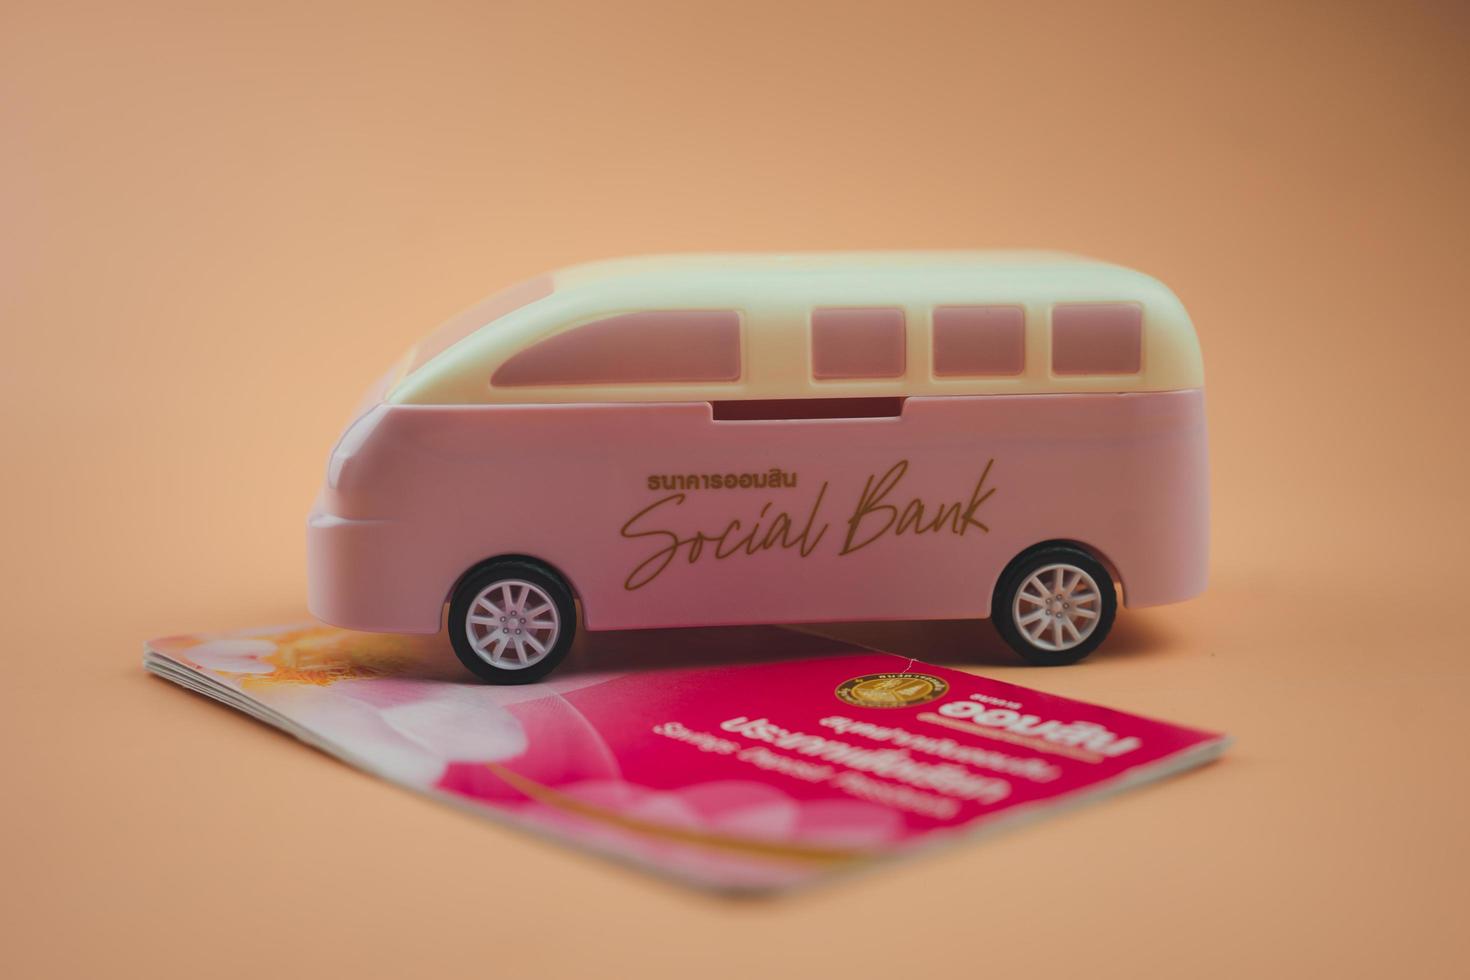 Bangkok, Thailand - October 31, 2022 The Government Savings Bank handing out car shaped piggy bank when your deposit money on National Savings Day 2022. photo